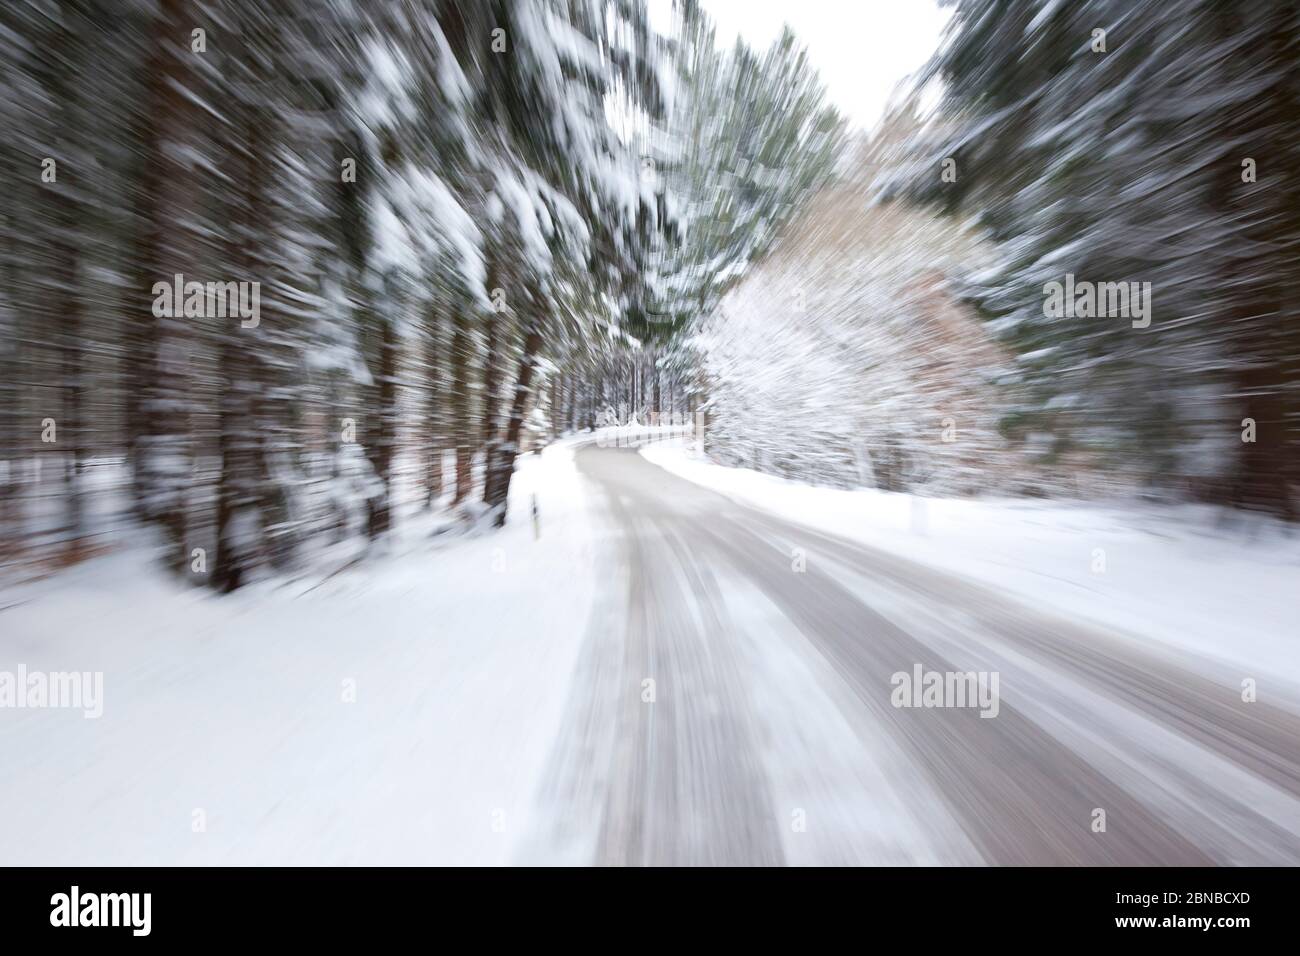 deep winter snowy road with a zoom, Germany, Bavaria Stock Photo